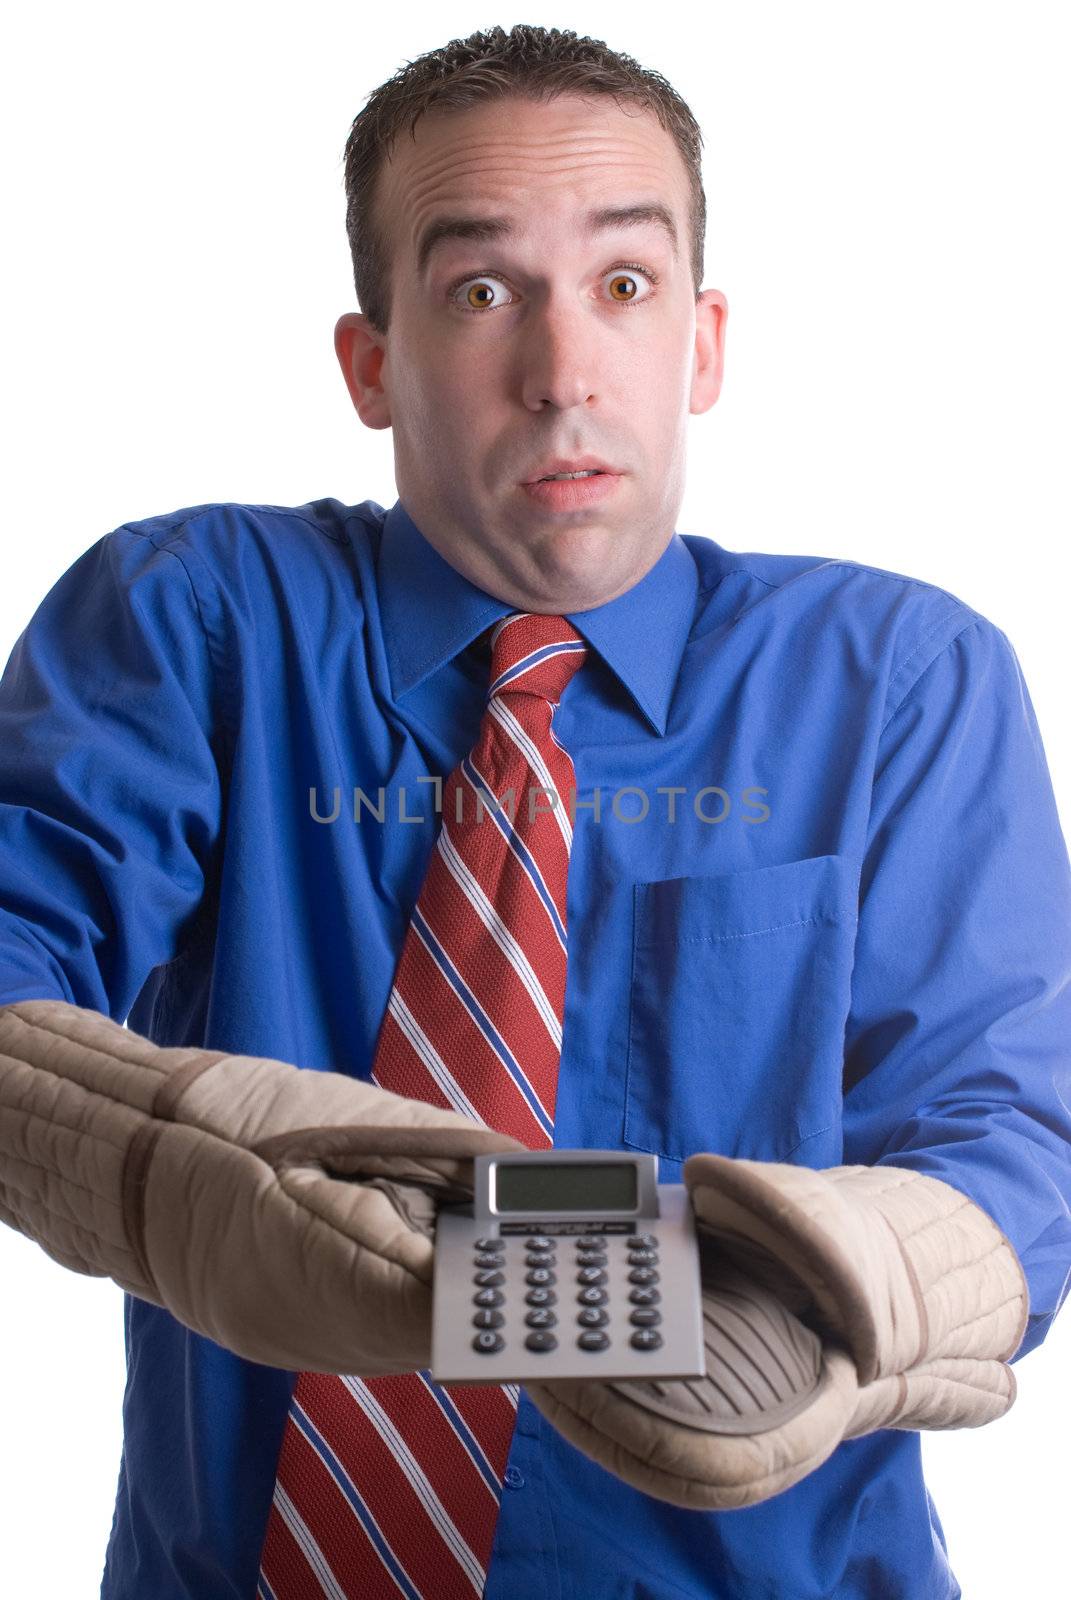 A young banker holding onto his calculator with oven mitts, isolated against a white background